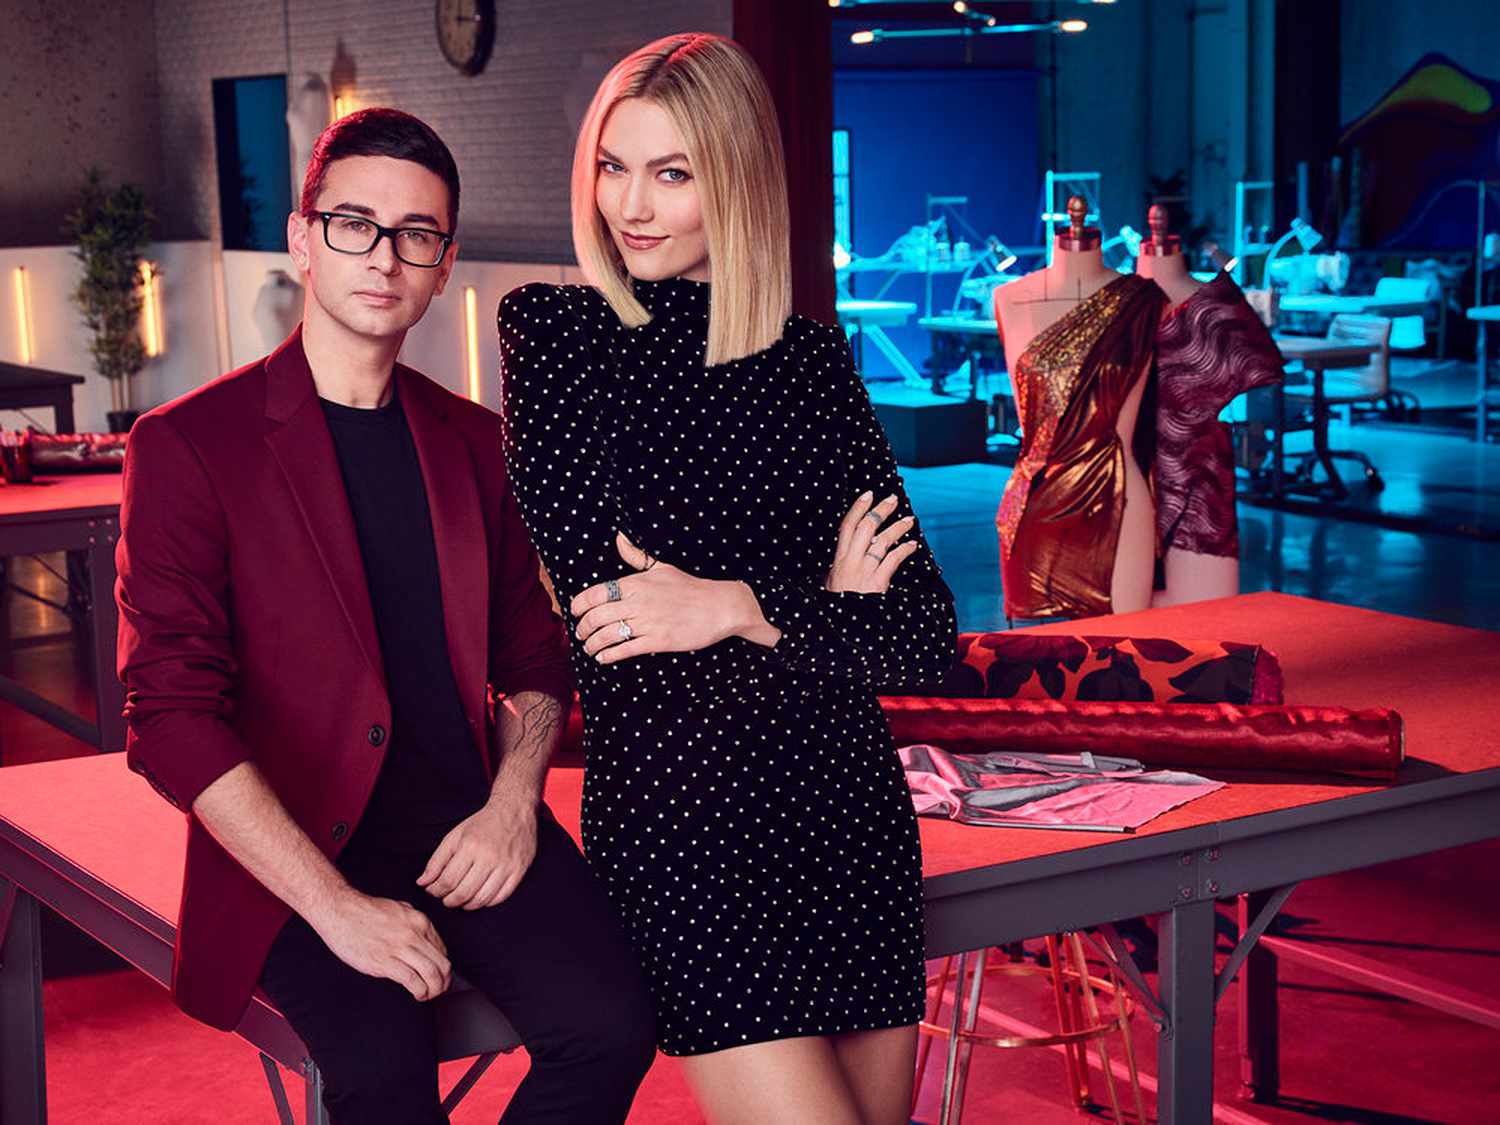 Christian Siriano and Karlie Kloss on 'Project Runway'